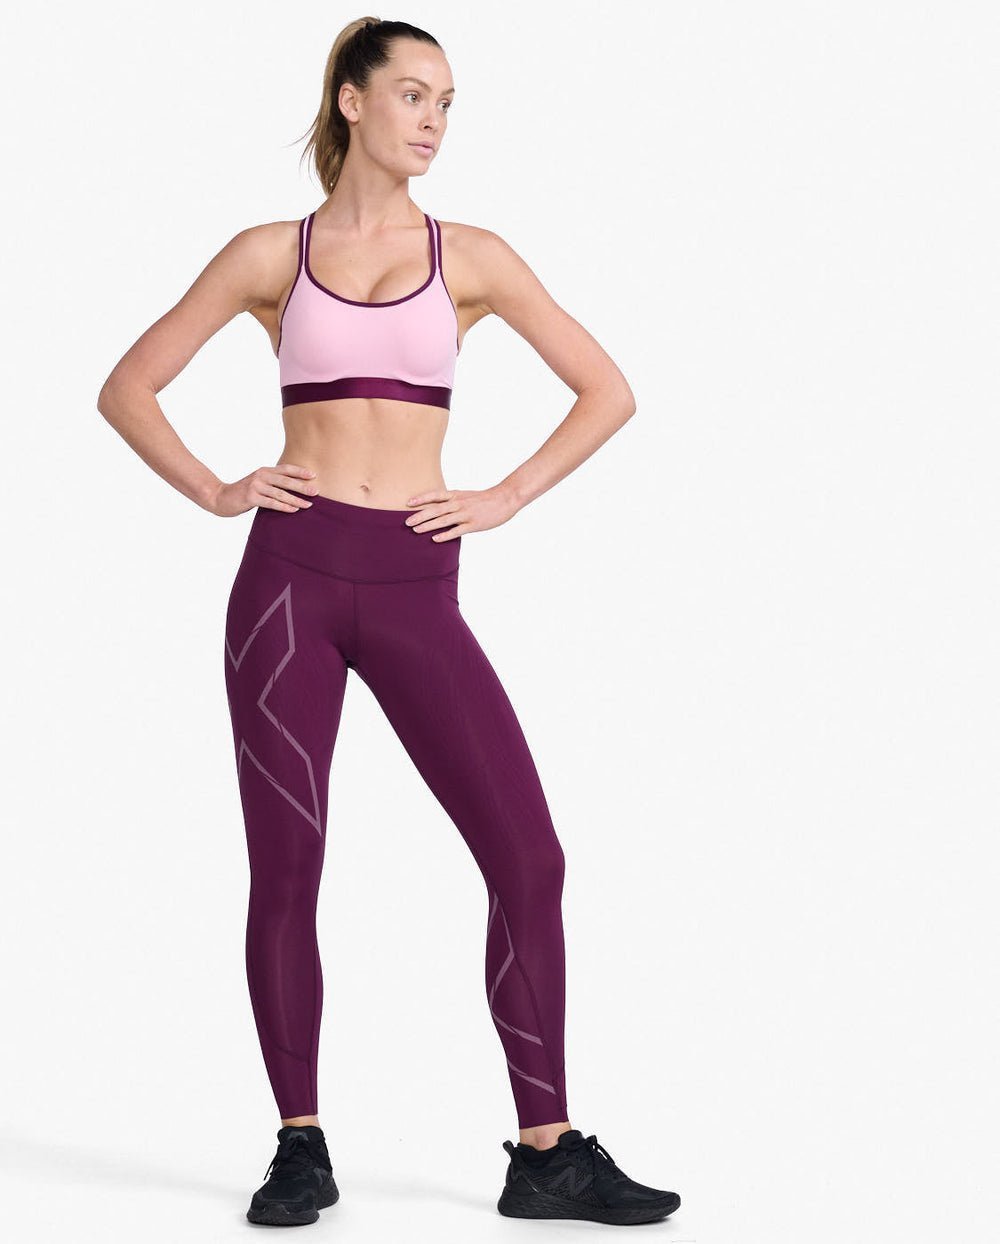 2XU South Africa - Women's Light Speed Mid-Rise Compression Tights - Beet/Beet Reflective